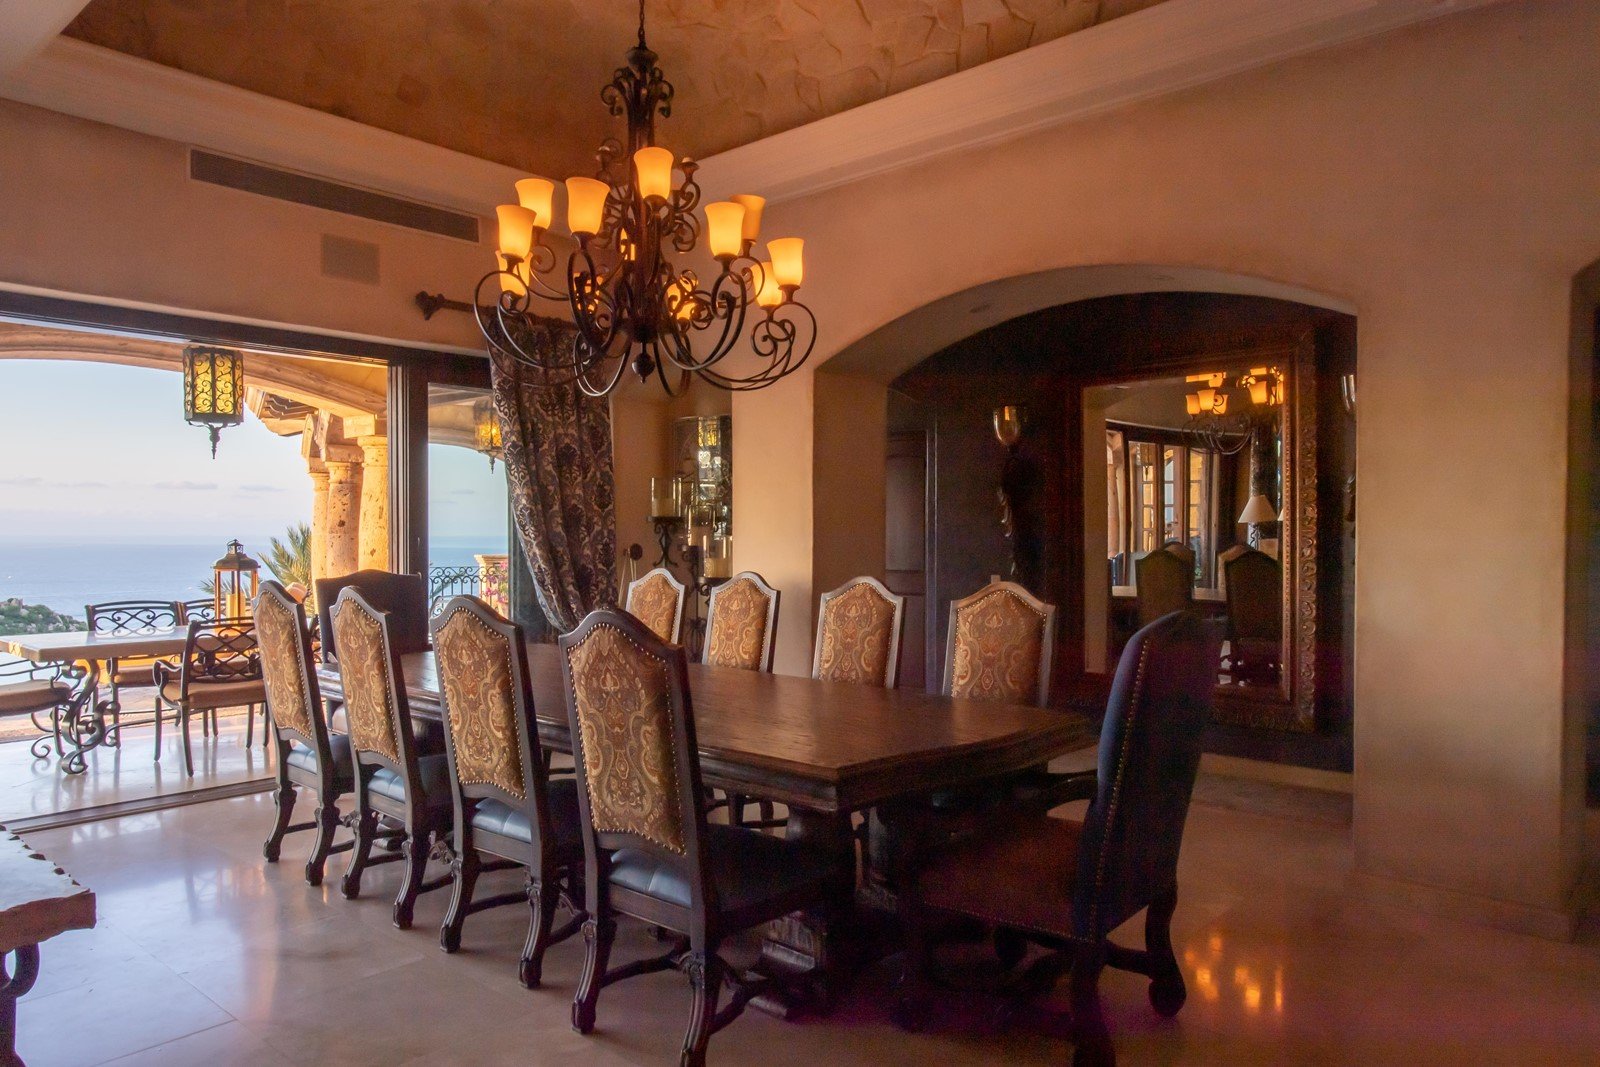 A view of the dining table with the outside door open to view the ocean from the table.